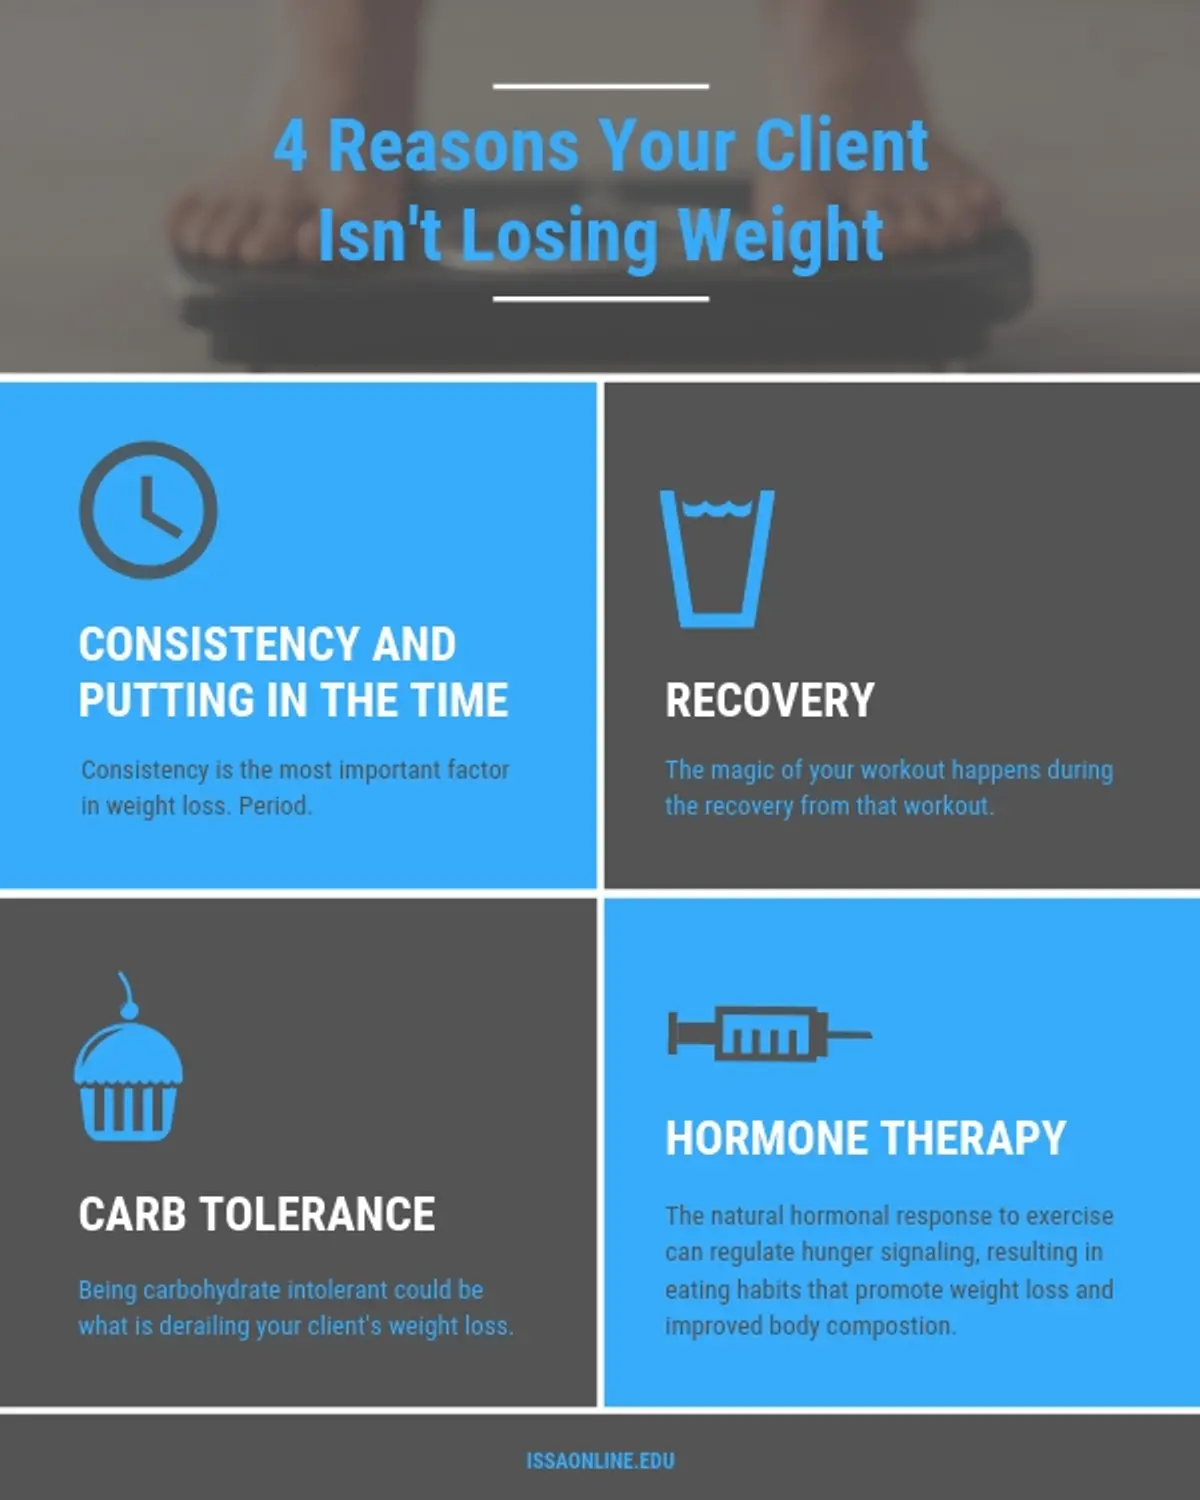 ISSA, International Sports Sciences Association, Certified Personal Trainer, ISSAonline, Nutrition, 4 Reasons Your Client Isn't Losing Weight,Client Handout, Infographic